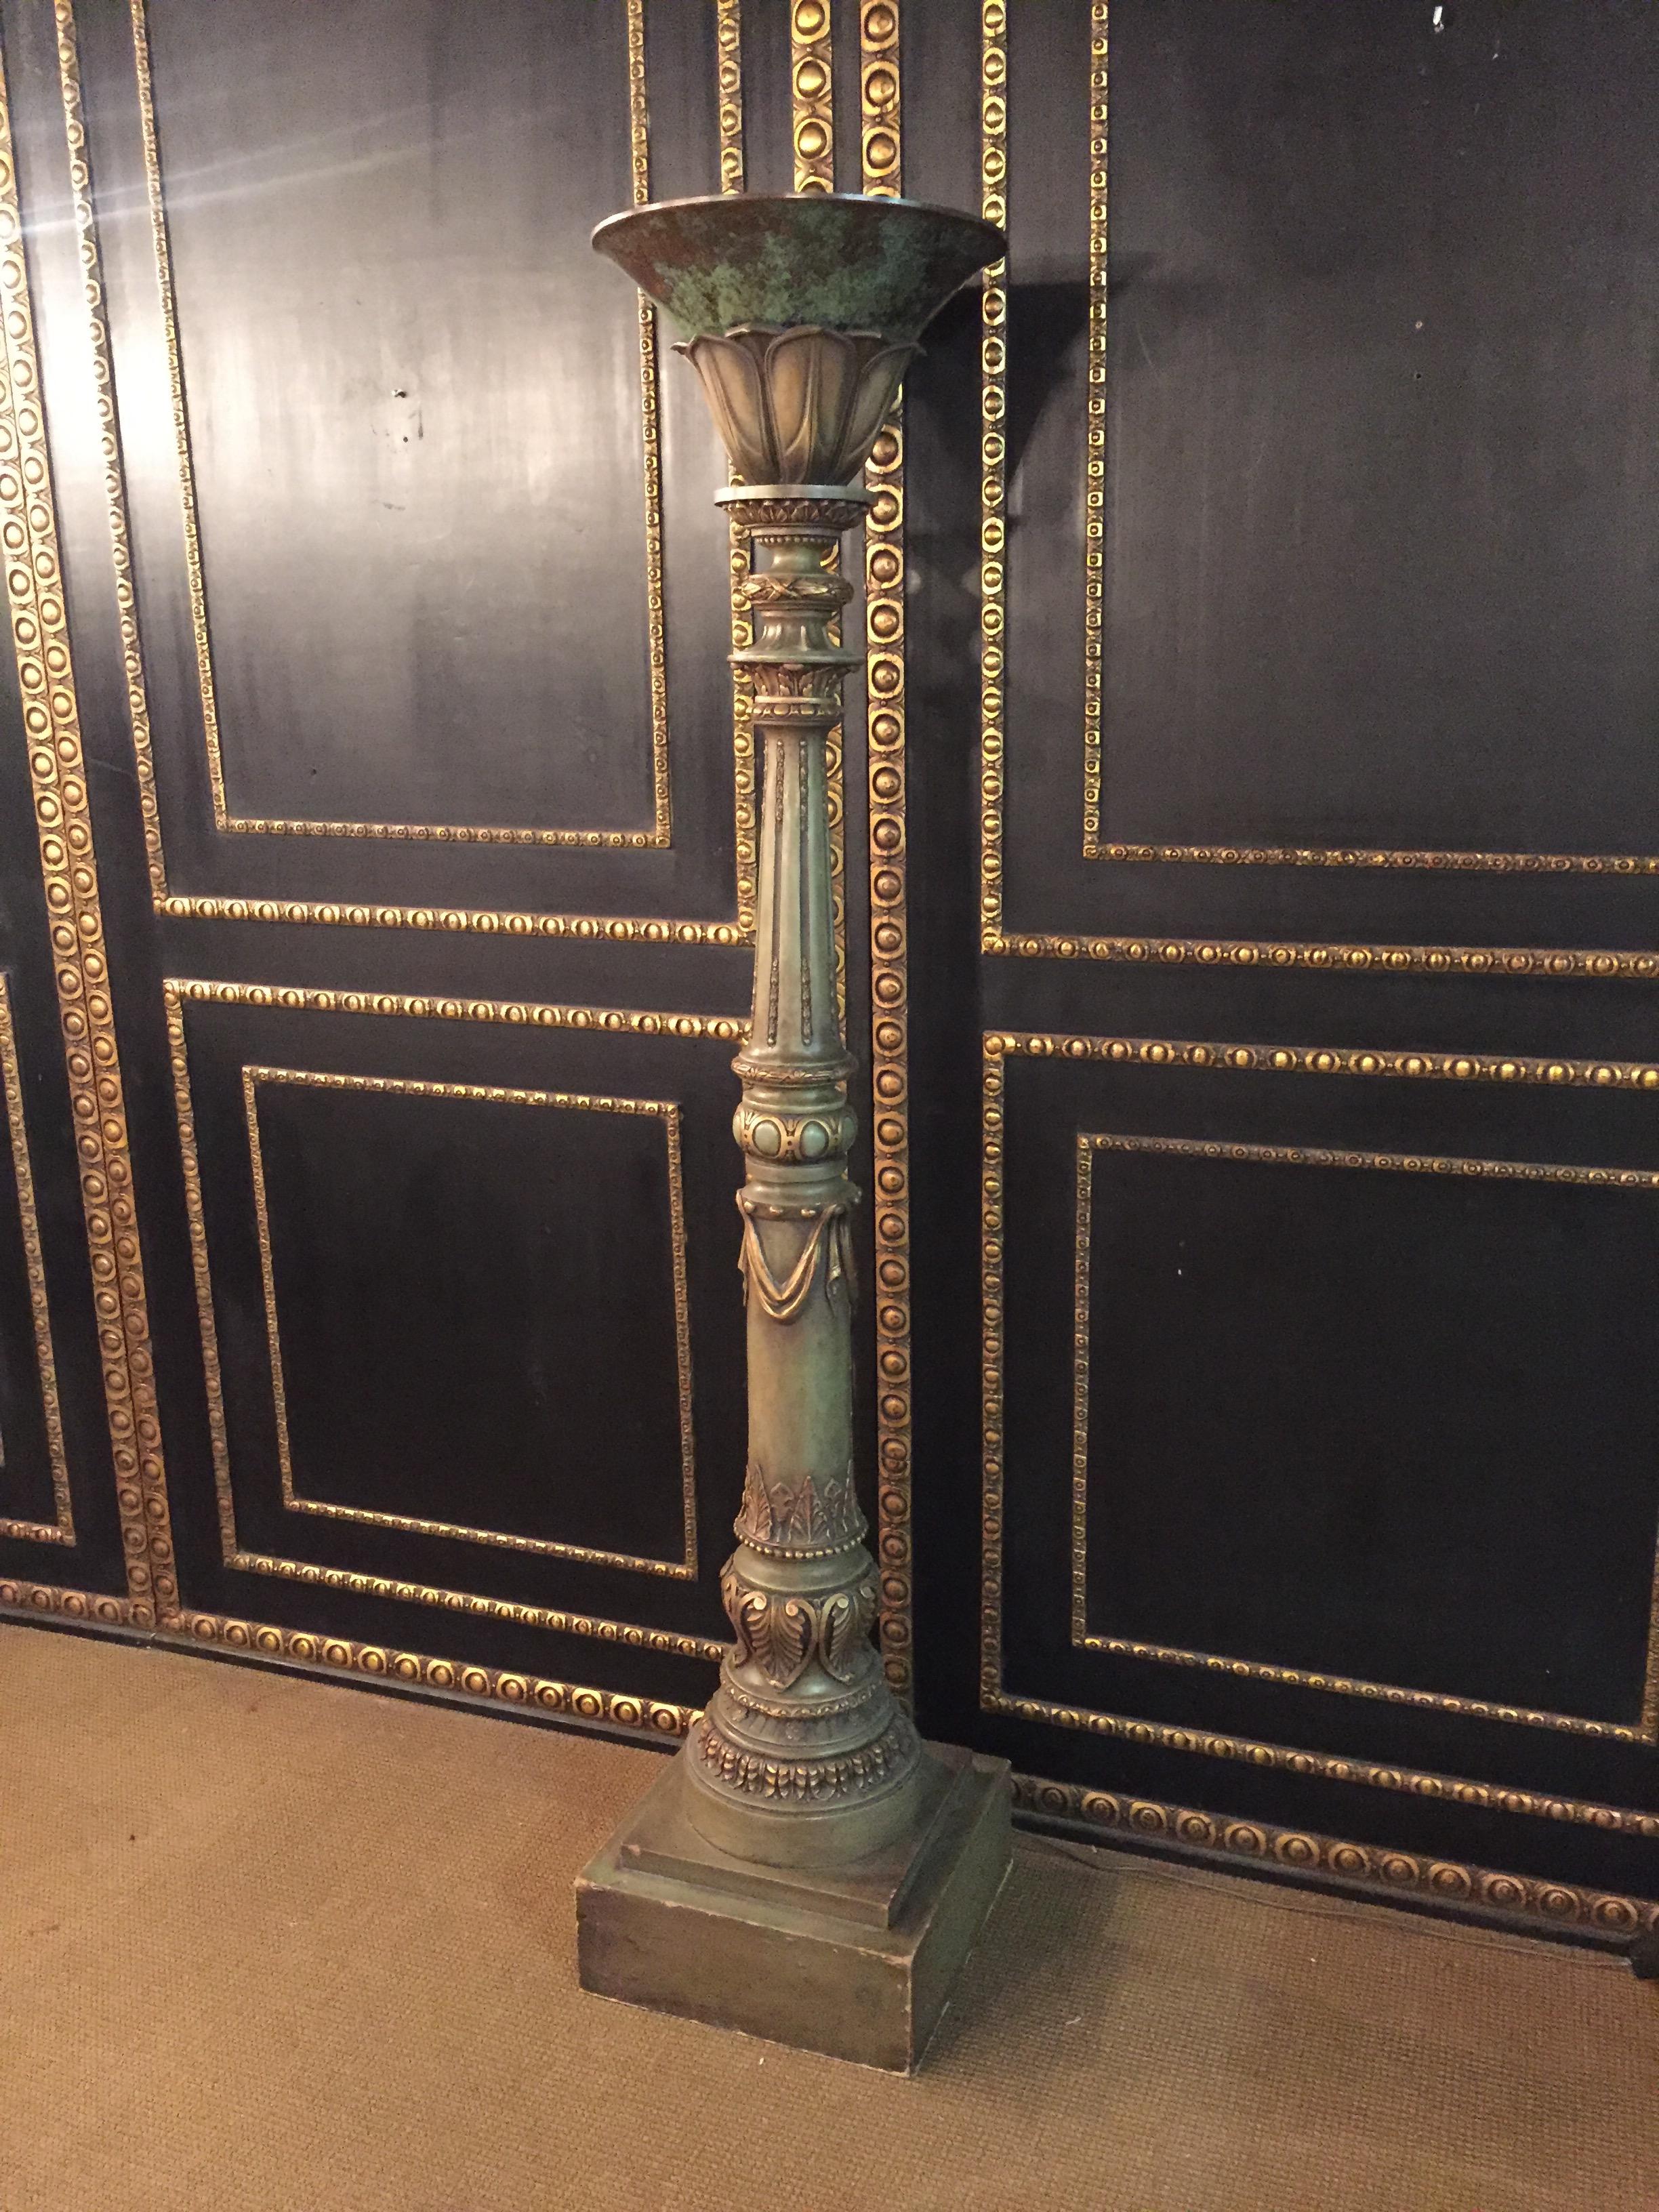 This lamp stand from the castle hotel in Berlin.
The entire facility was designed by designer Karl Lagerfeld.

The hotel has now been bought by the fashion designer Patrick Hellmann.